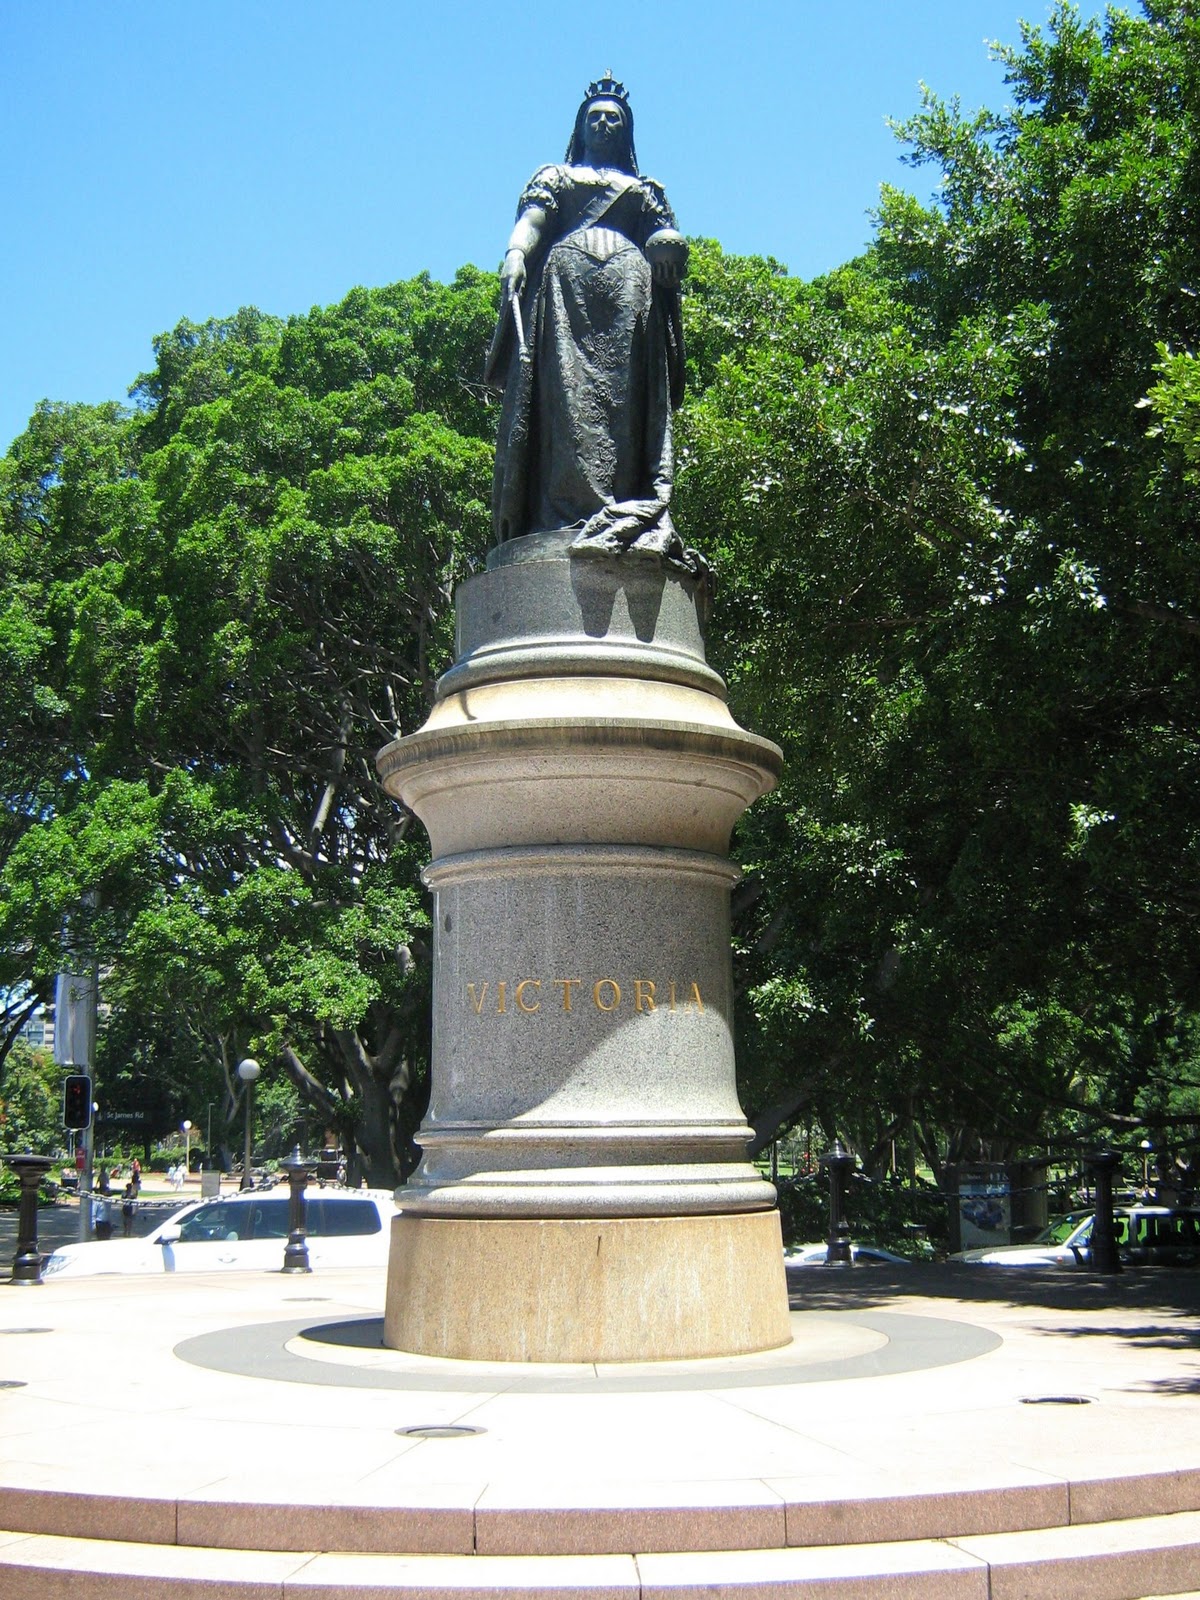 Queen Victoria - A statue and a scandal! - Pauline Conolly